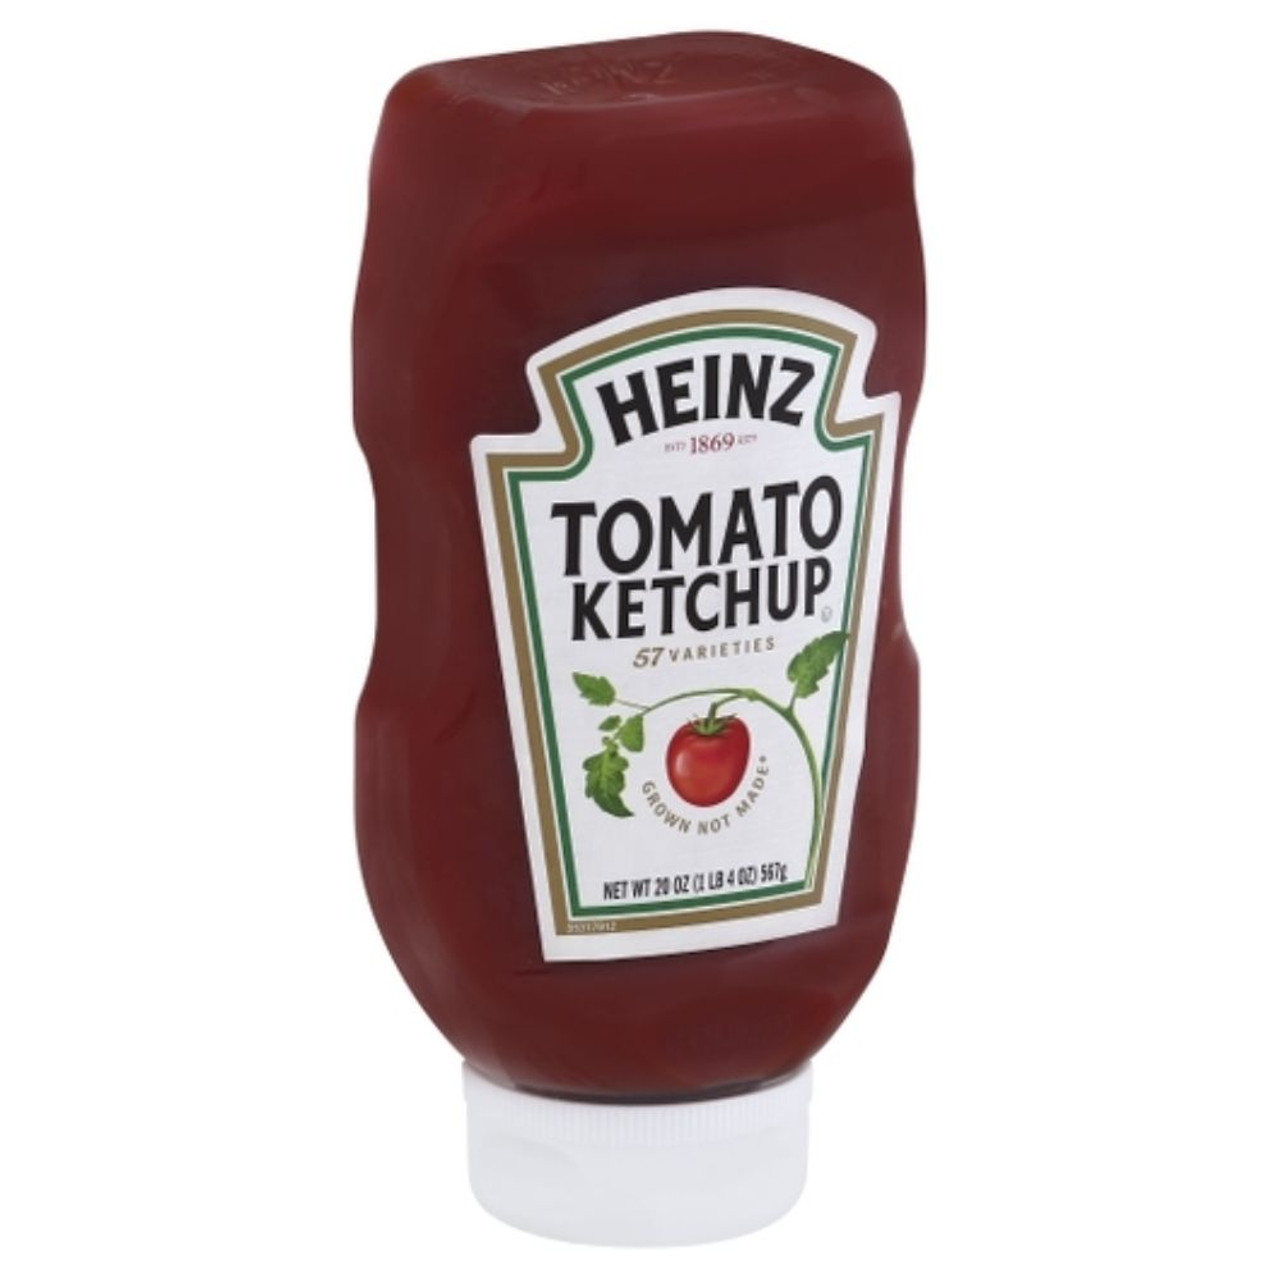 Heinz Tomato Ketchup, 2.25-Ounce Glass Jars (Pack of 60)